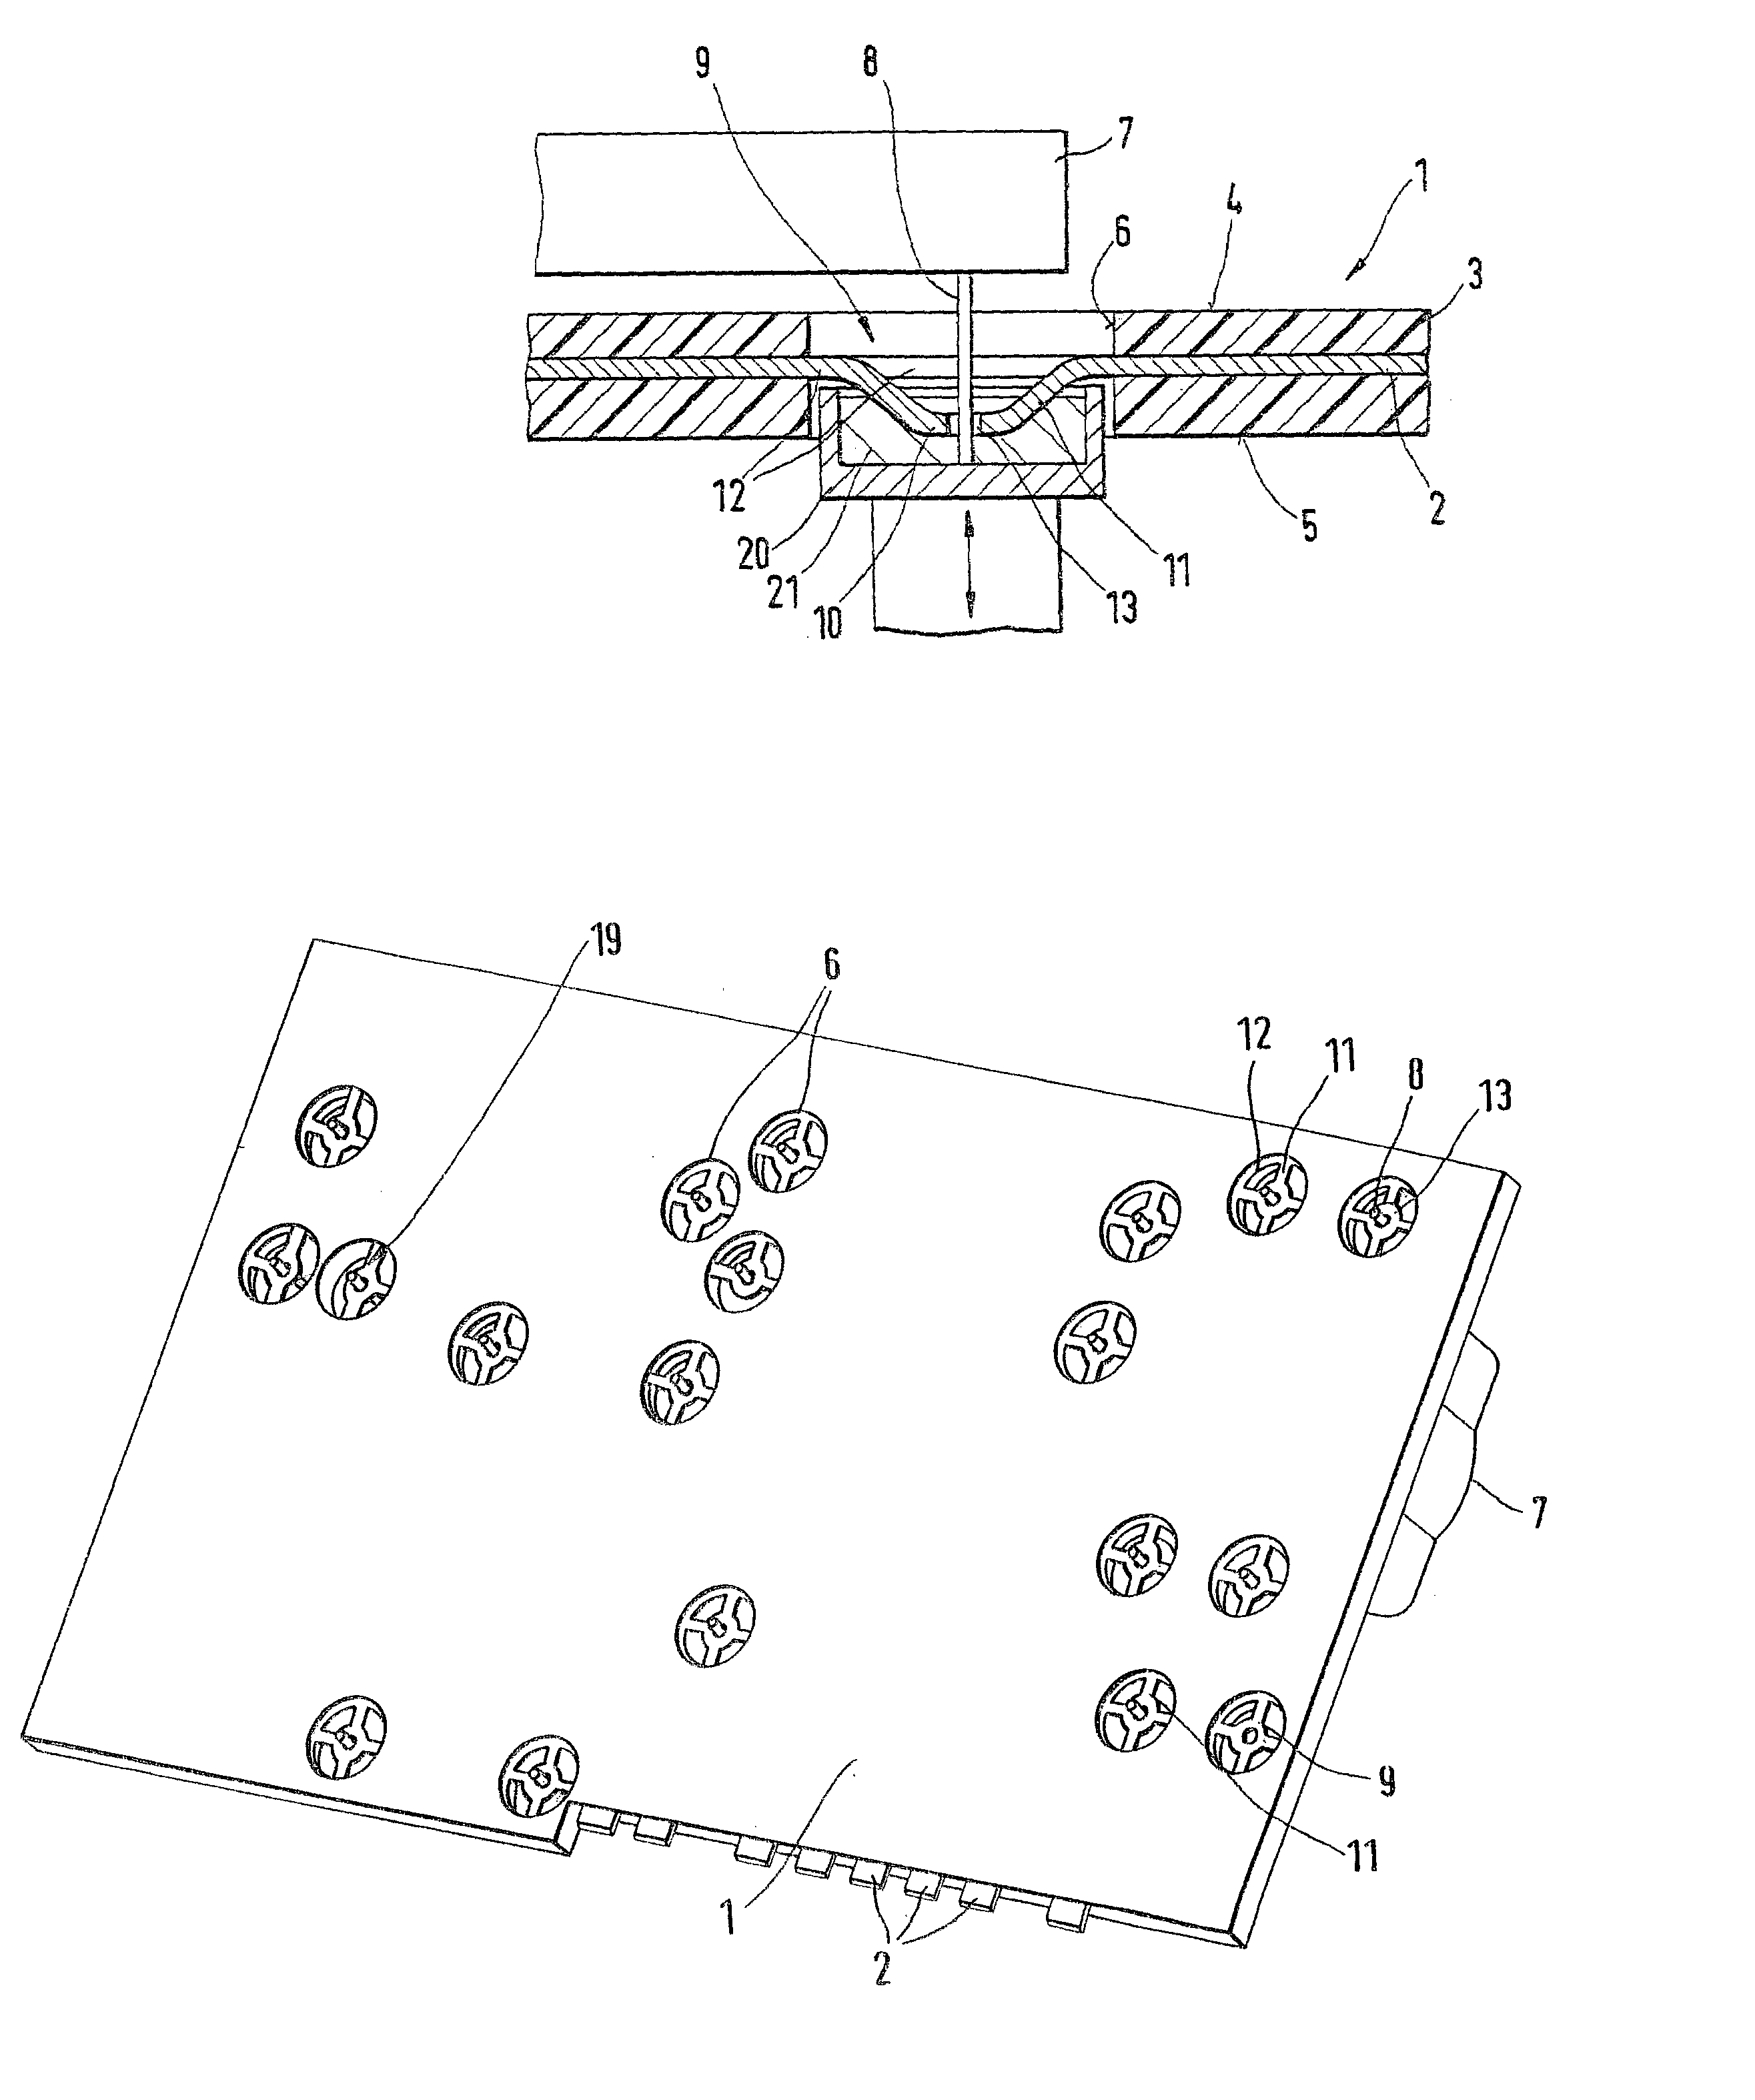 Module support for electrical/electronic components